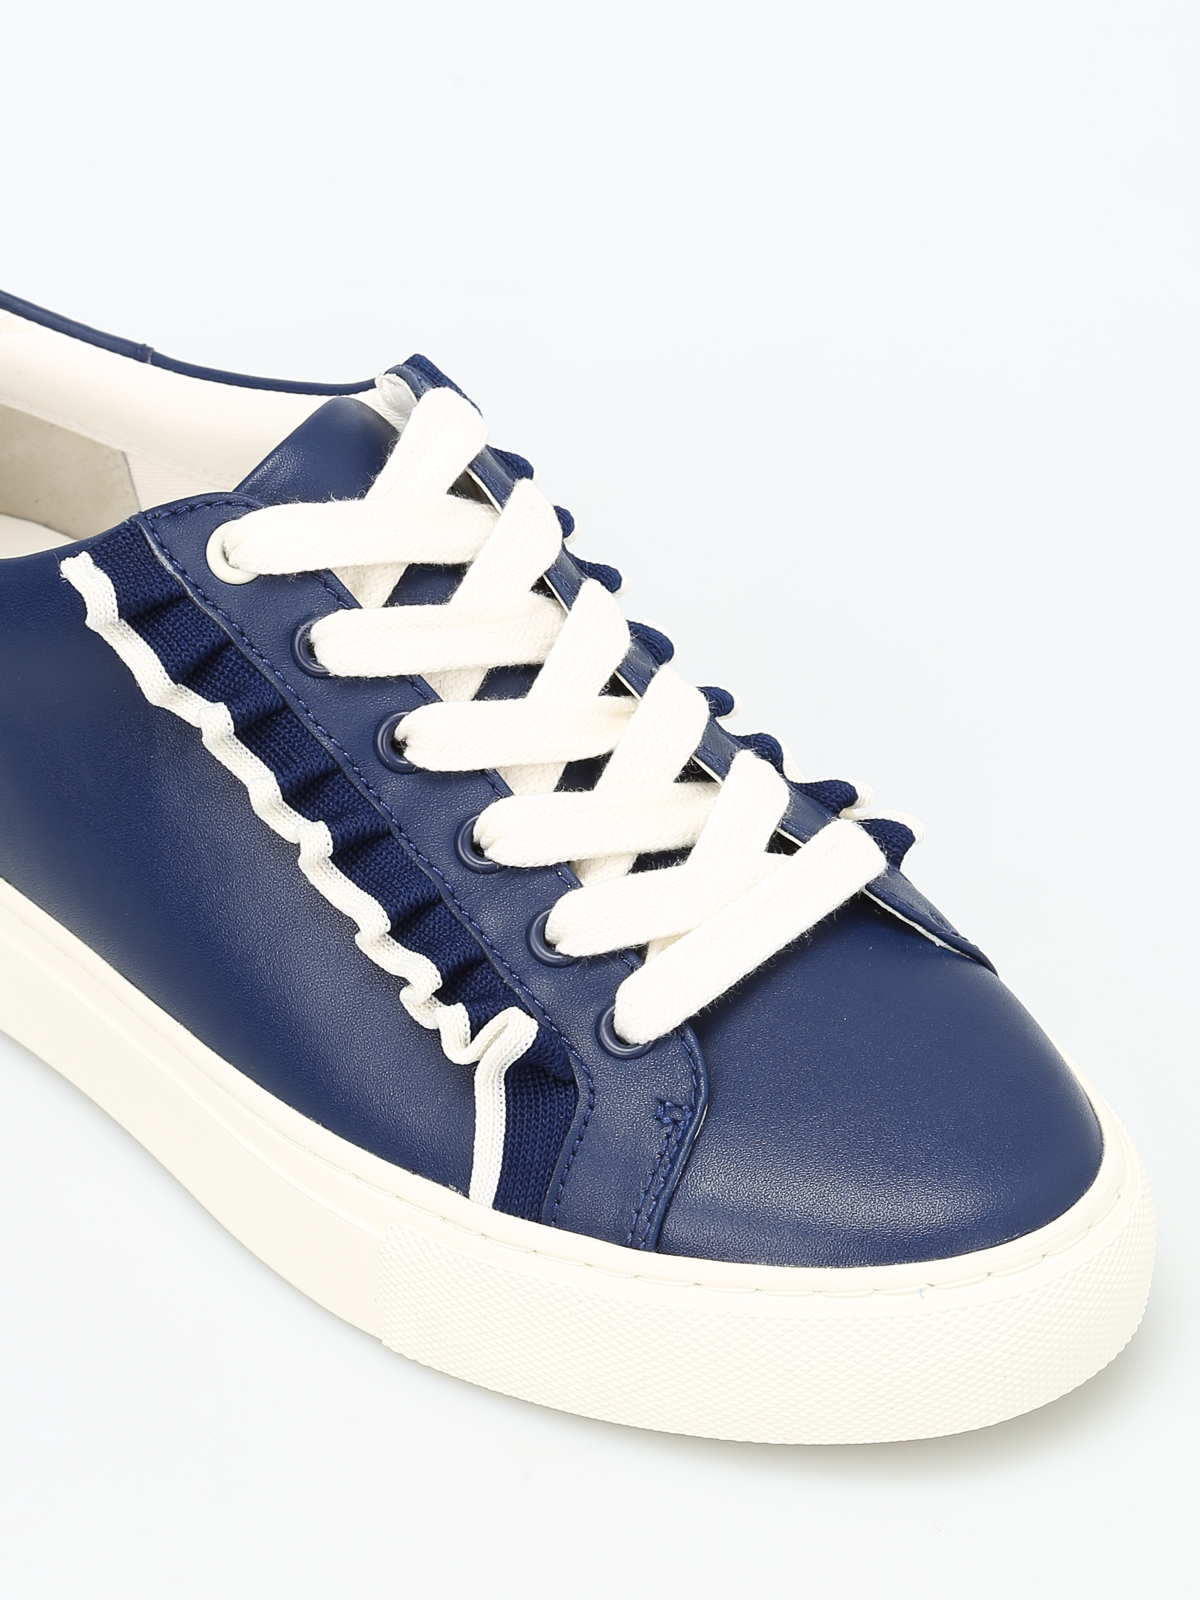 Trainers Tory Burch - Ruffle leather sneakers - 36558400 | iKRIX.com